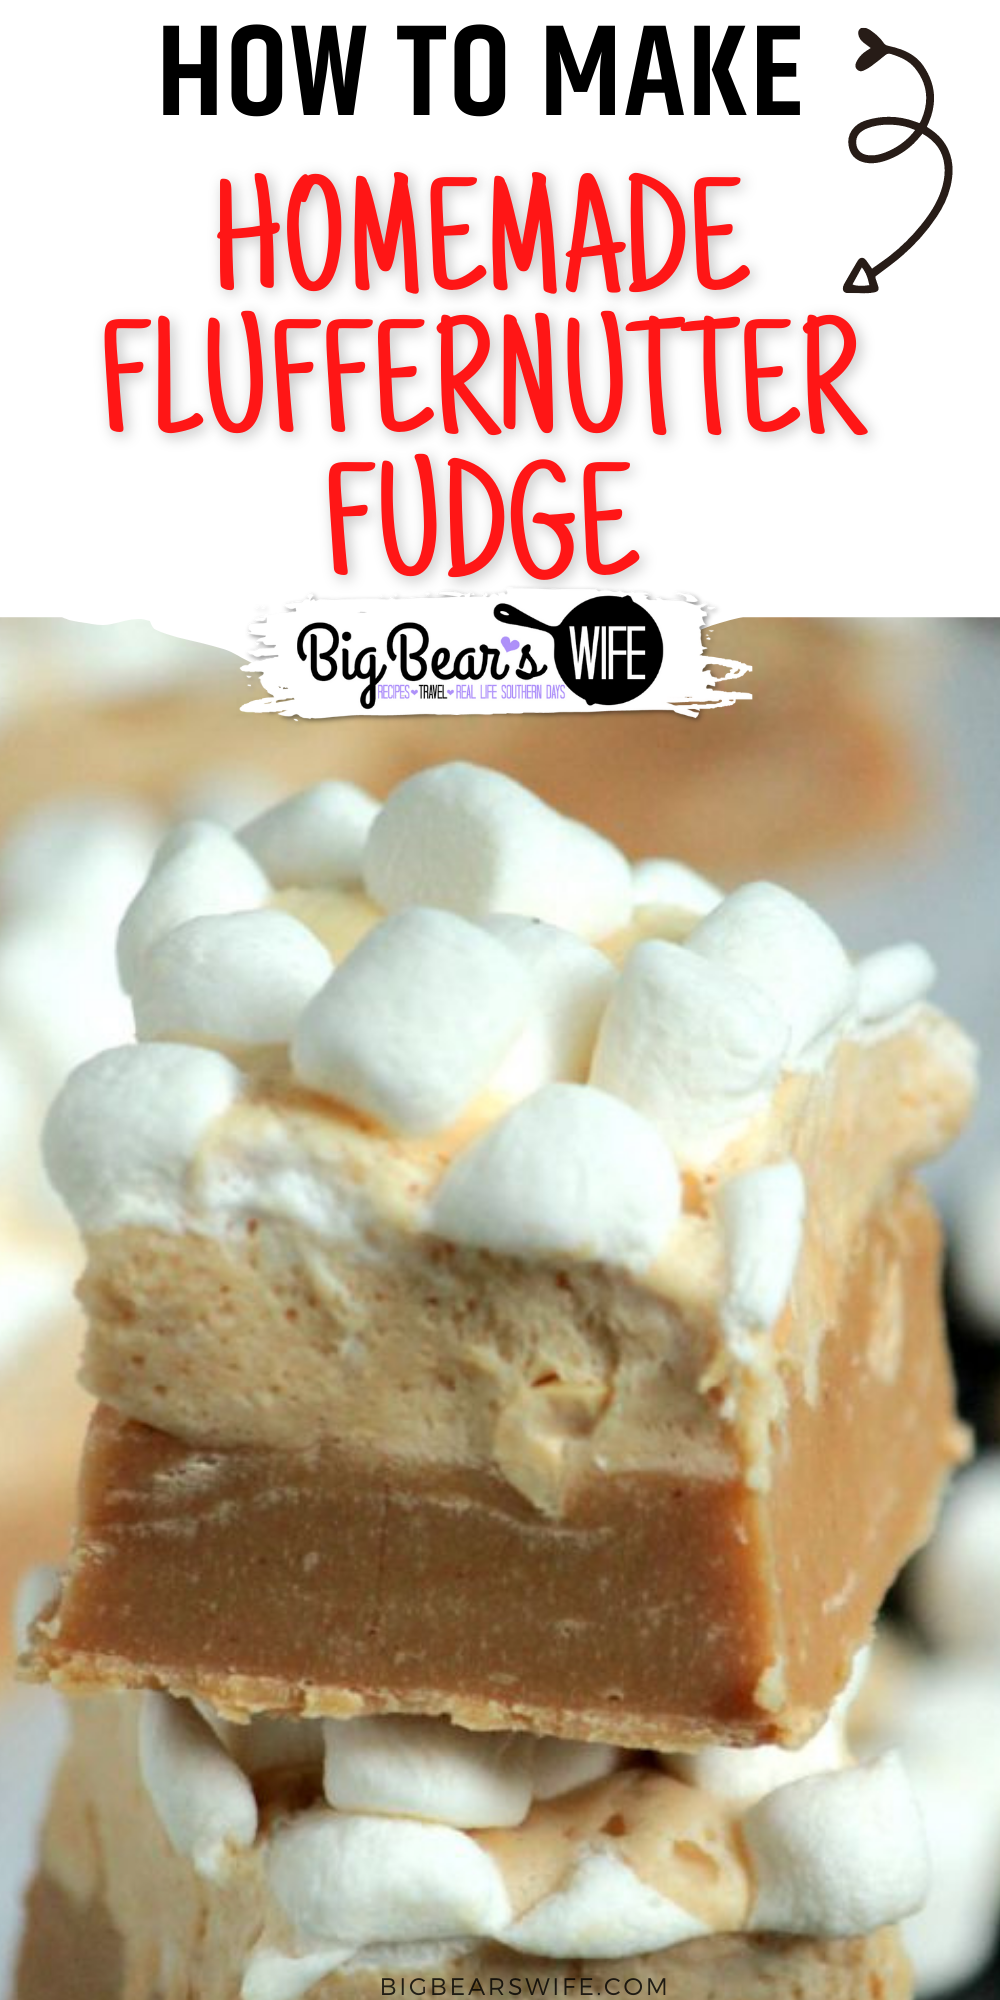 This Homemade Fluffernutter Fudge has layers of Peanut Butter and Marshmallow Peanut Butter Fudge stacked on top of each other for the perfect Fluffernutter dessert! 
 via @bigbearswife